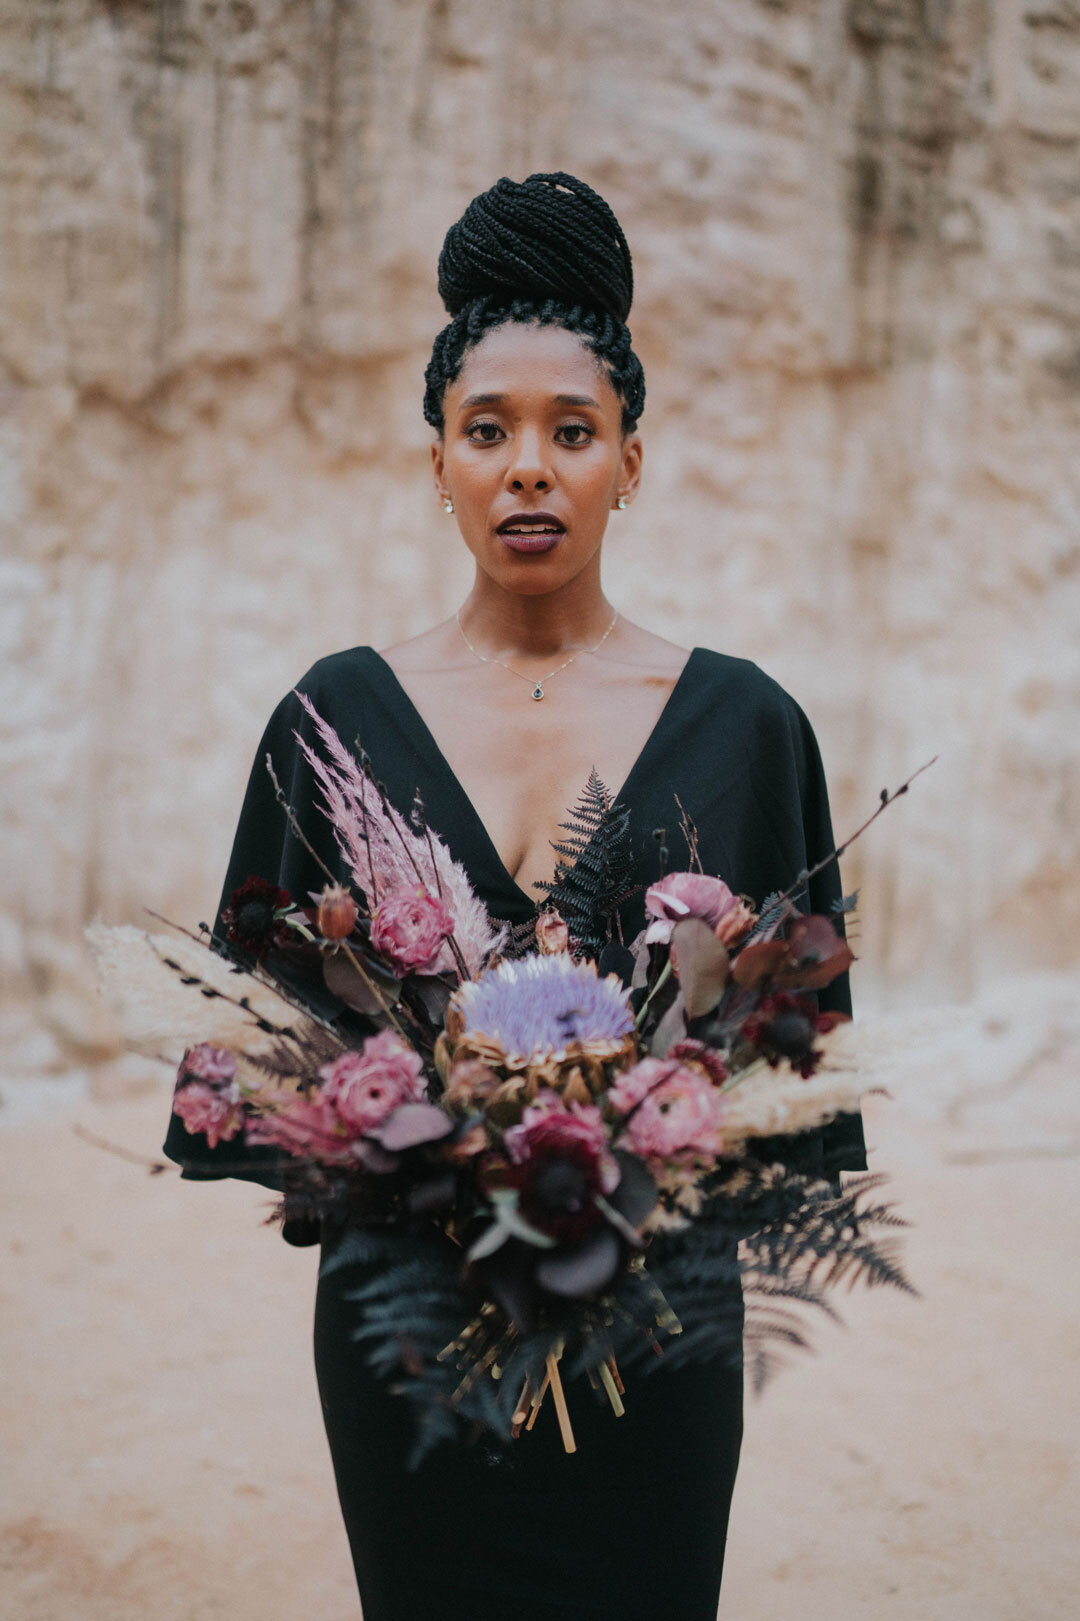 Black woman in a black dress holding a pink bouquet